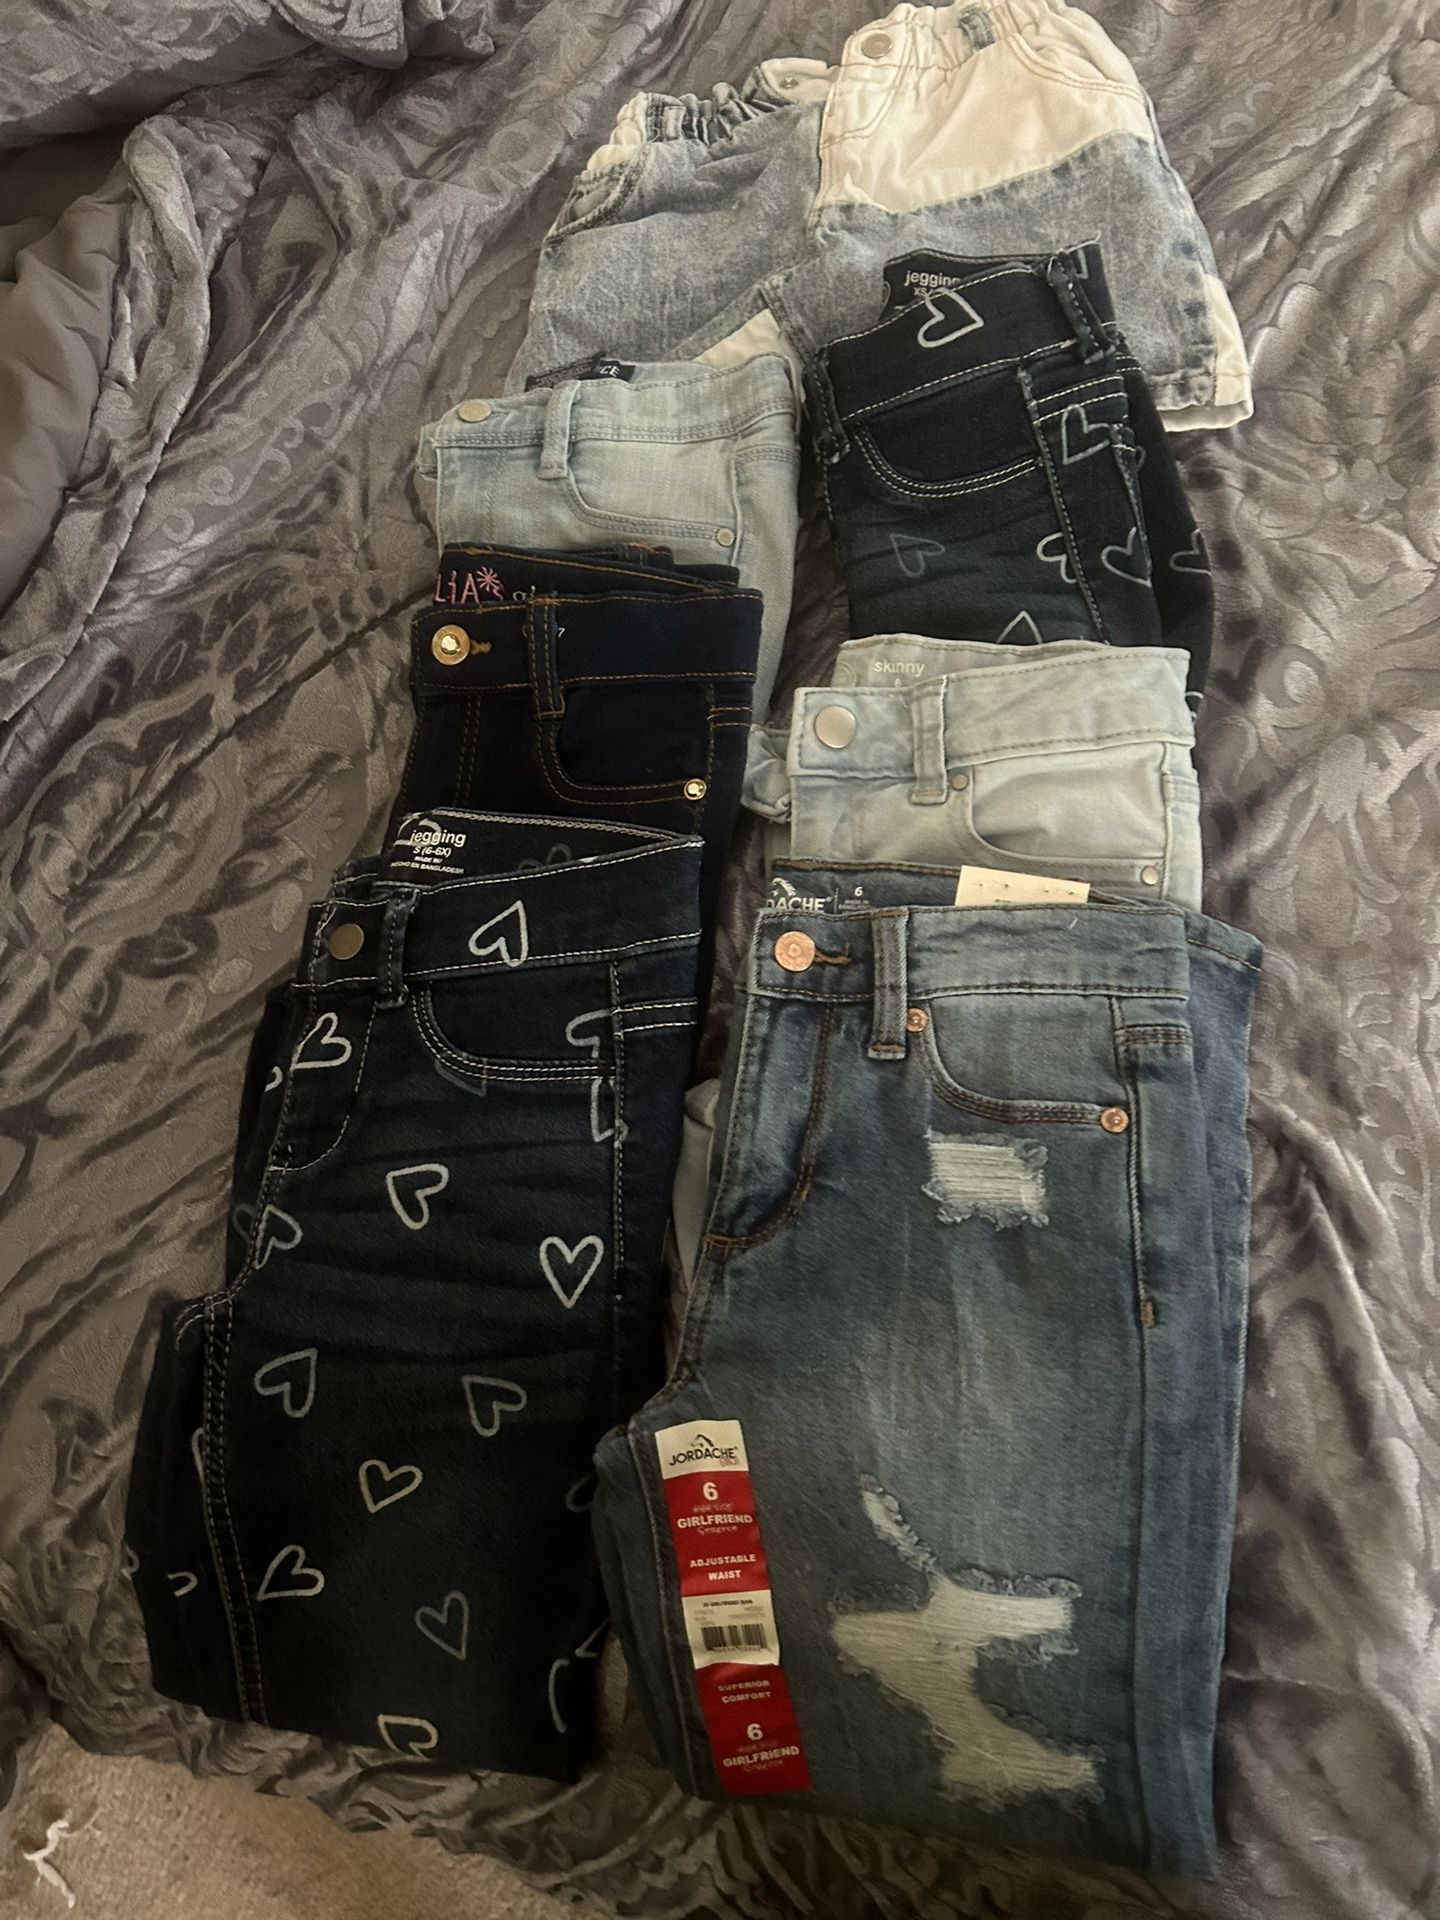 Six Pairs Of Leggings Jeans, Size 5/6 one toddler skirt, size 5